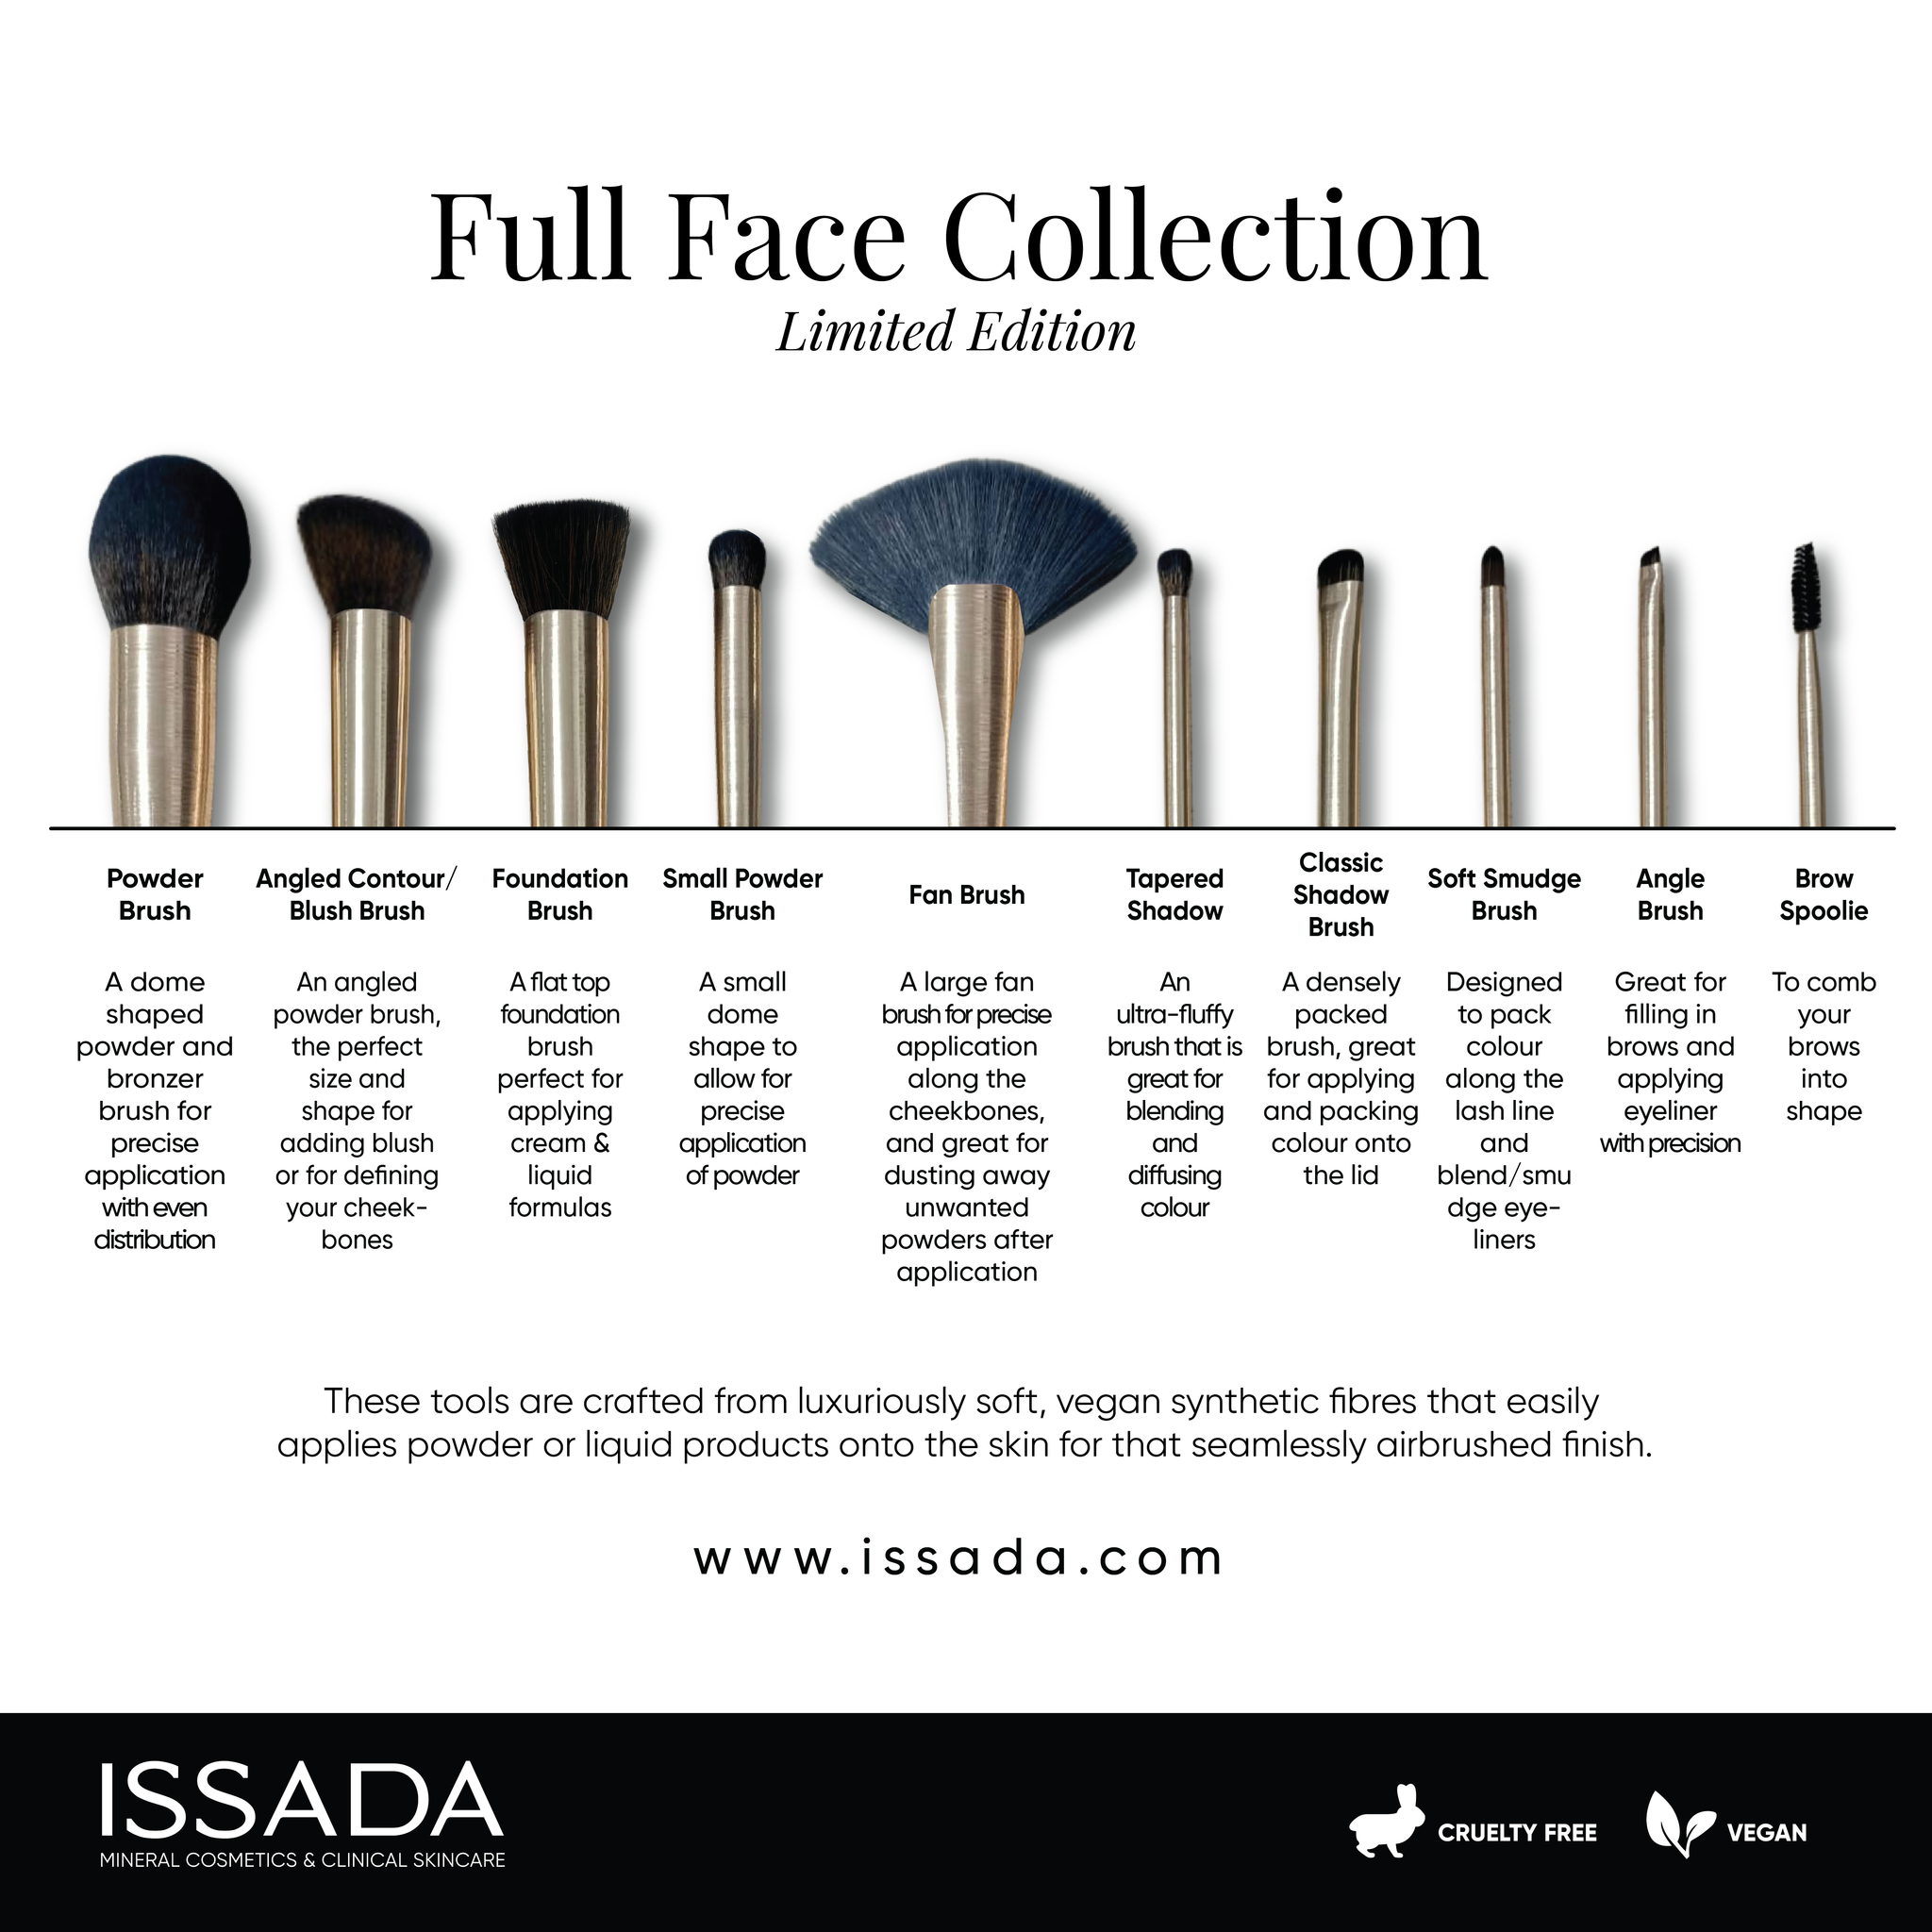 Limited Edition Full Face Brush Collection